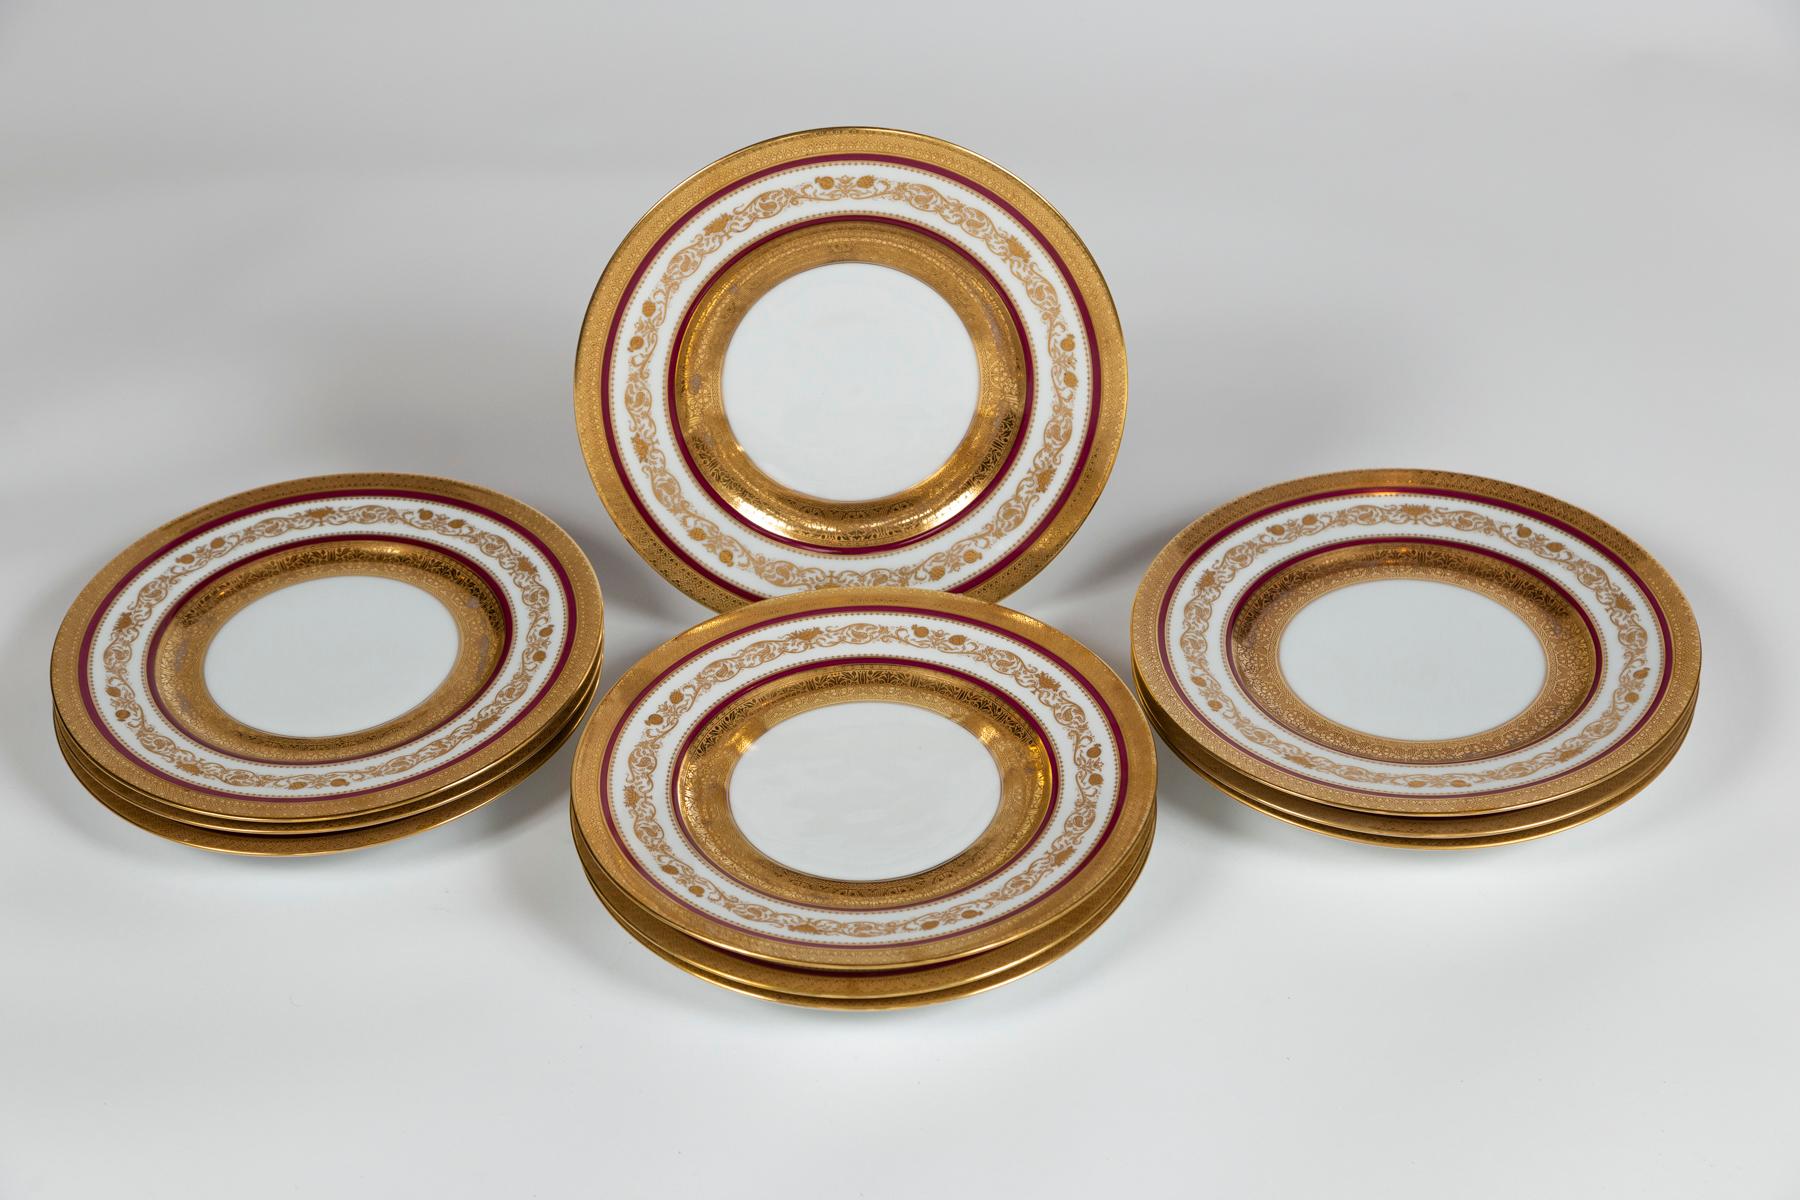 Gilt Antique Hutschenreuther Dinner Plates, Early 20th Century, Bavaria For Sale